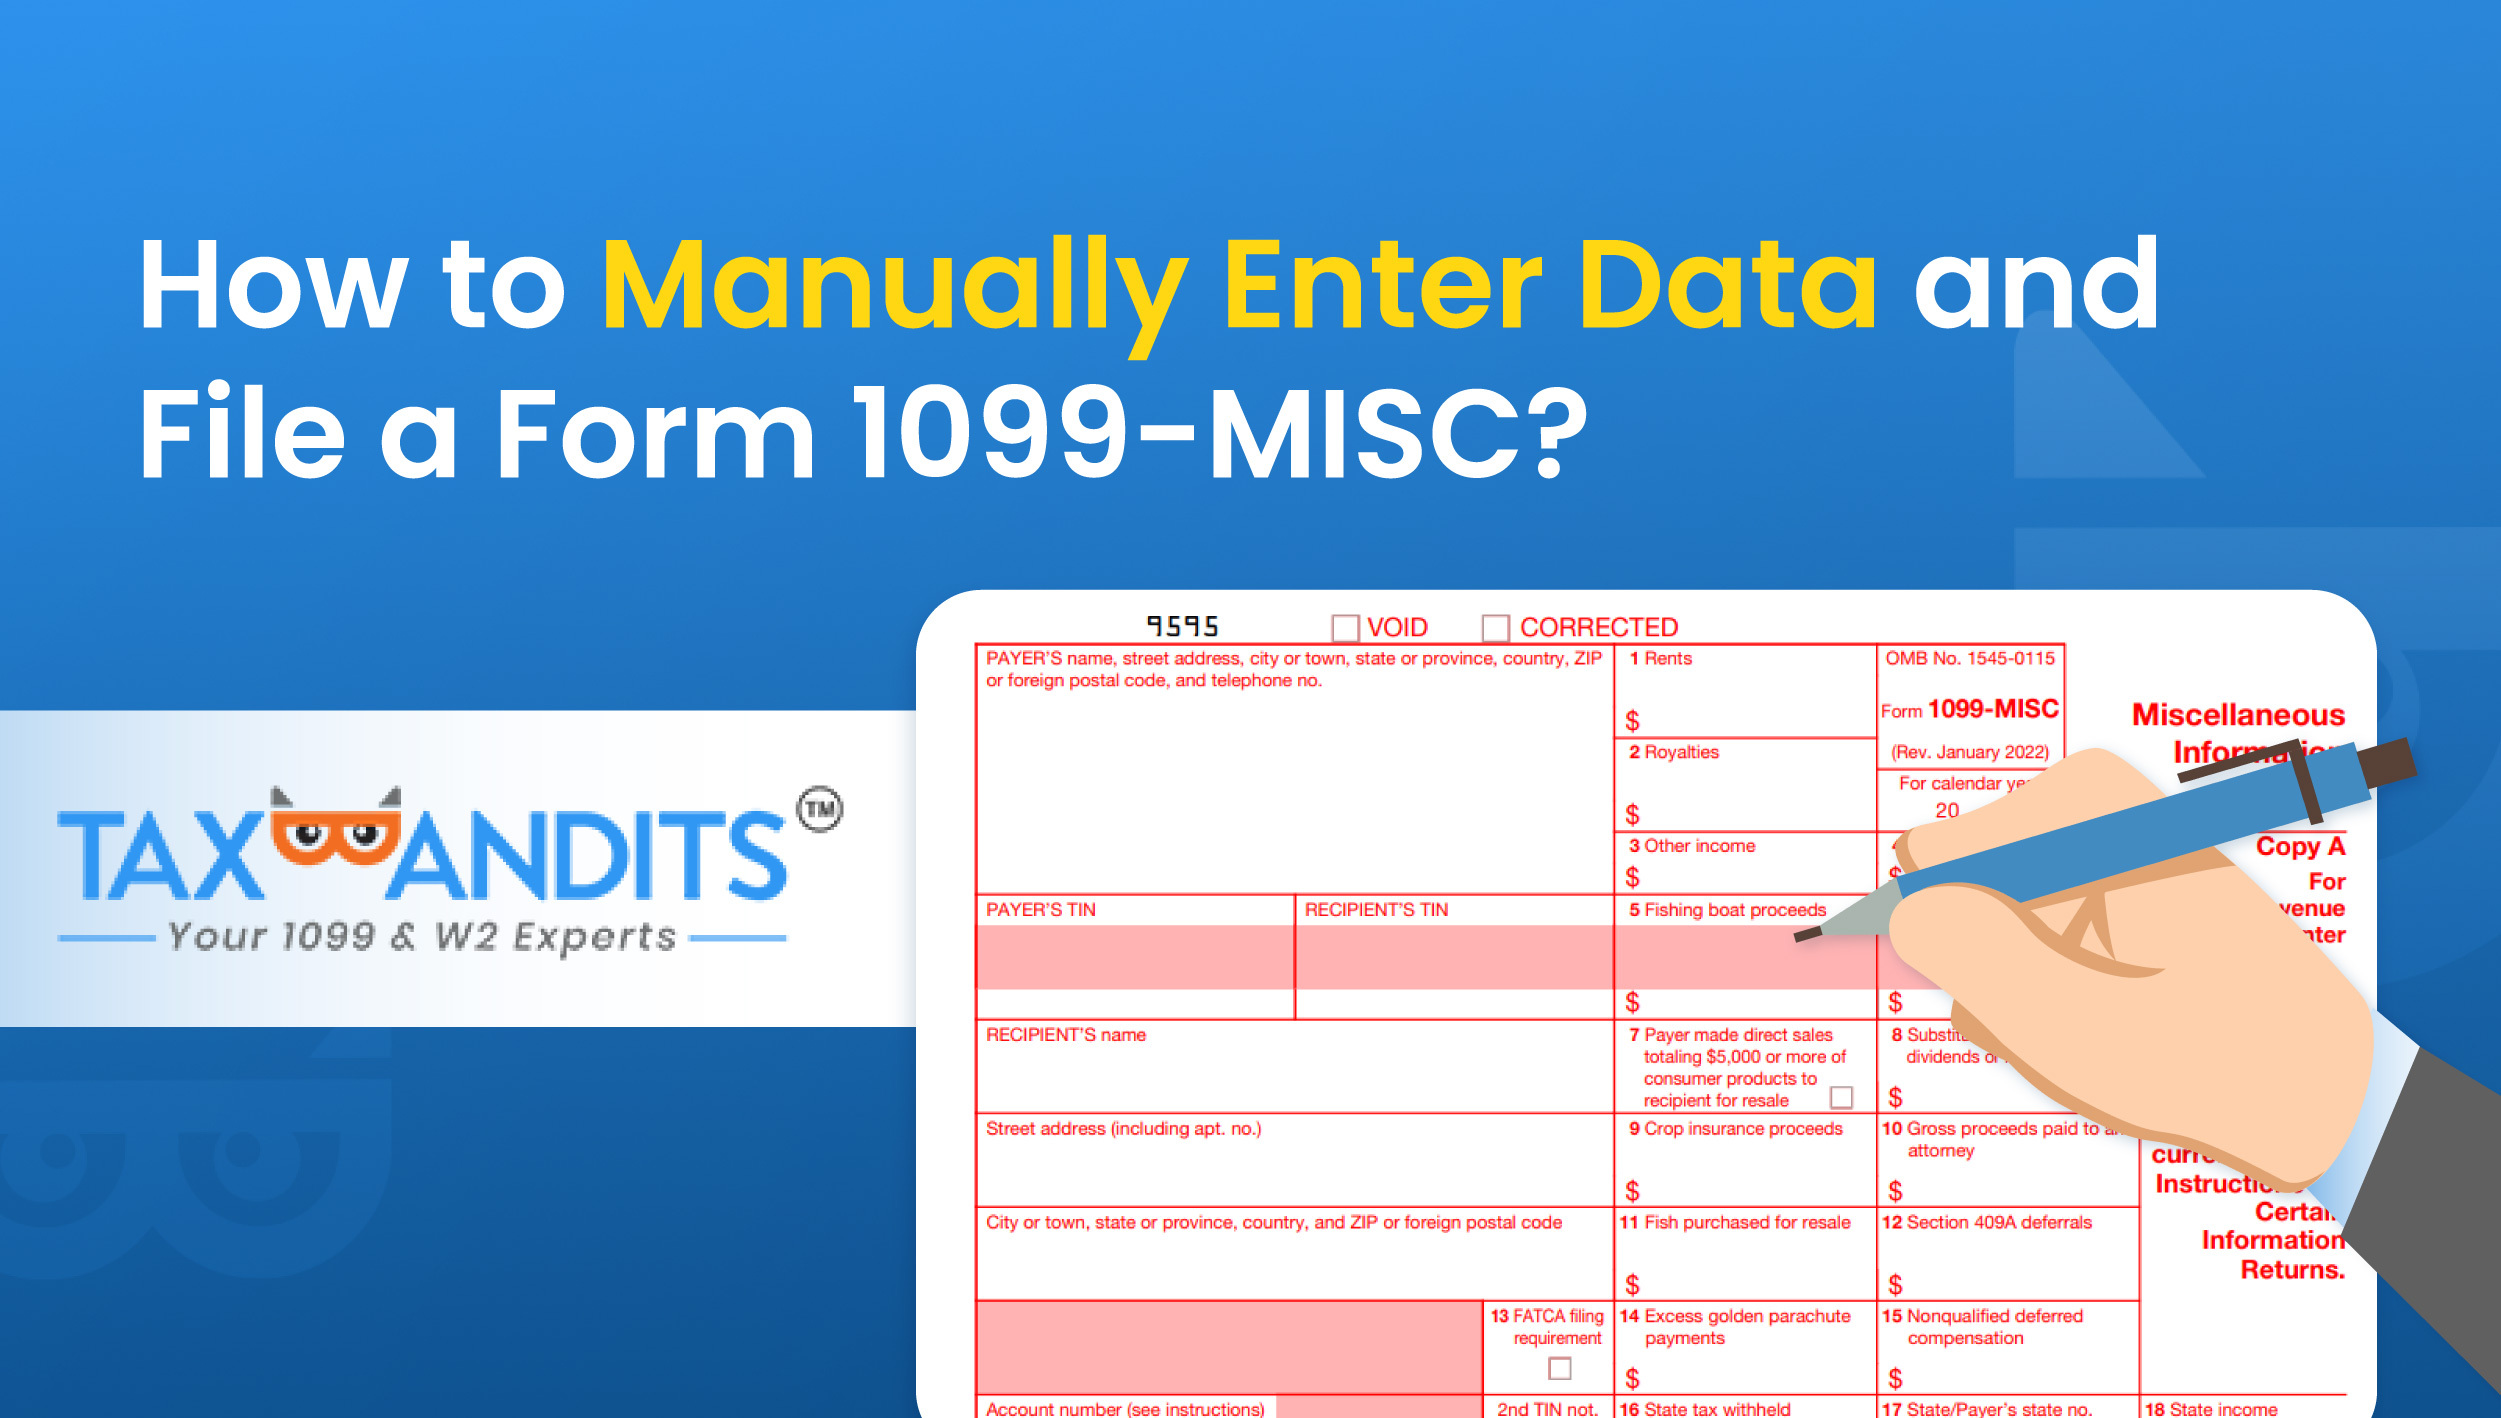 How to Manually Enter Data and File a Form 1099-MISC